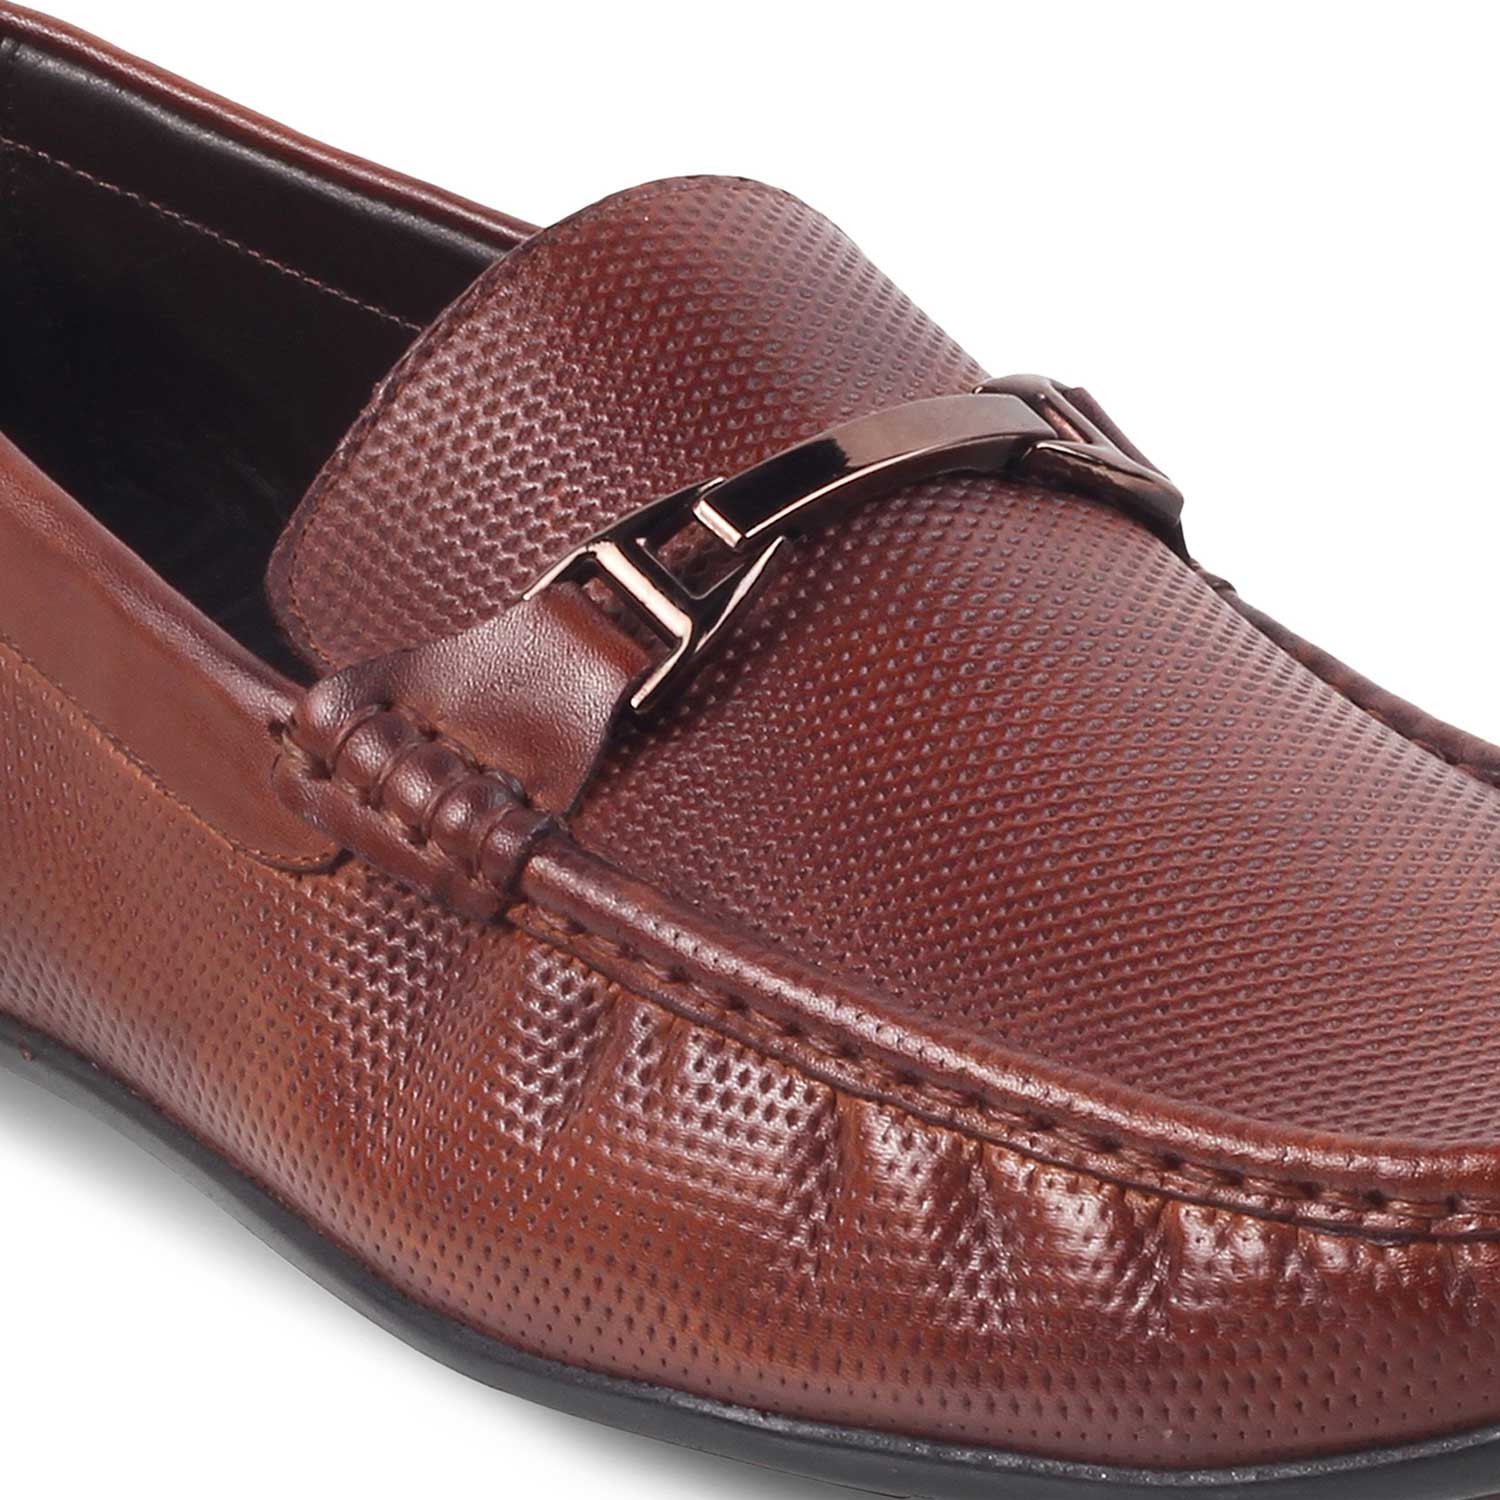 Tresmode-The Abianca Tan Men's Leather Driving Loafers Tresmode-Tresmode